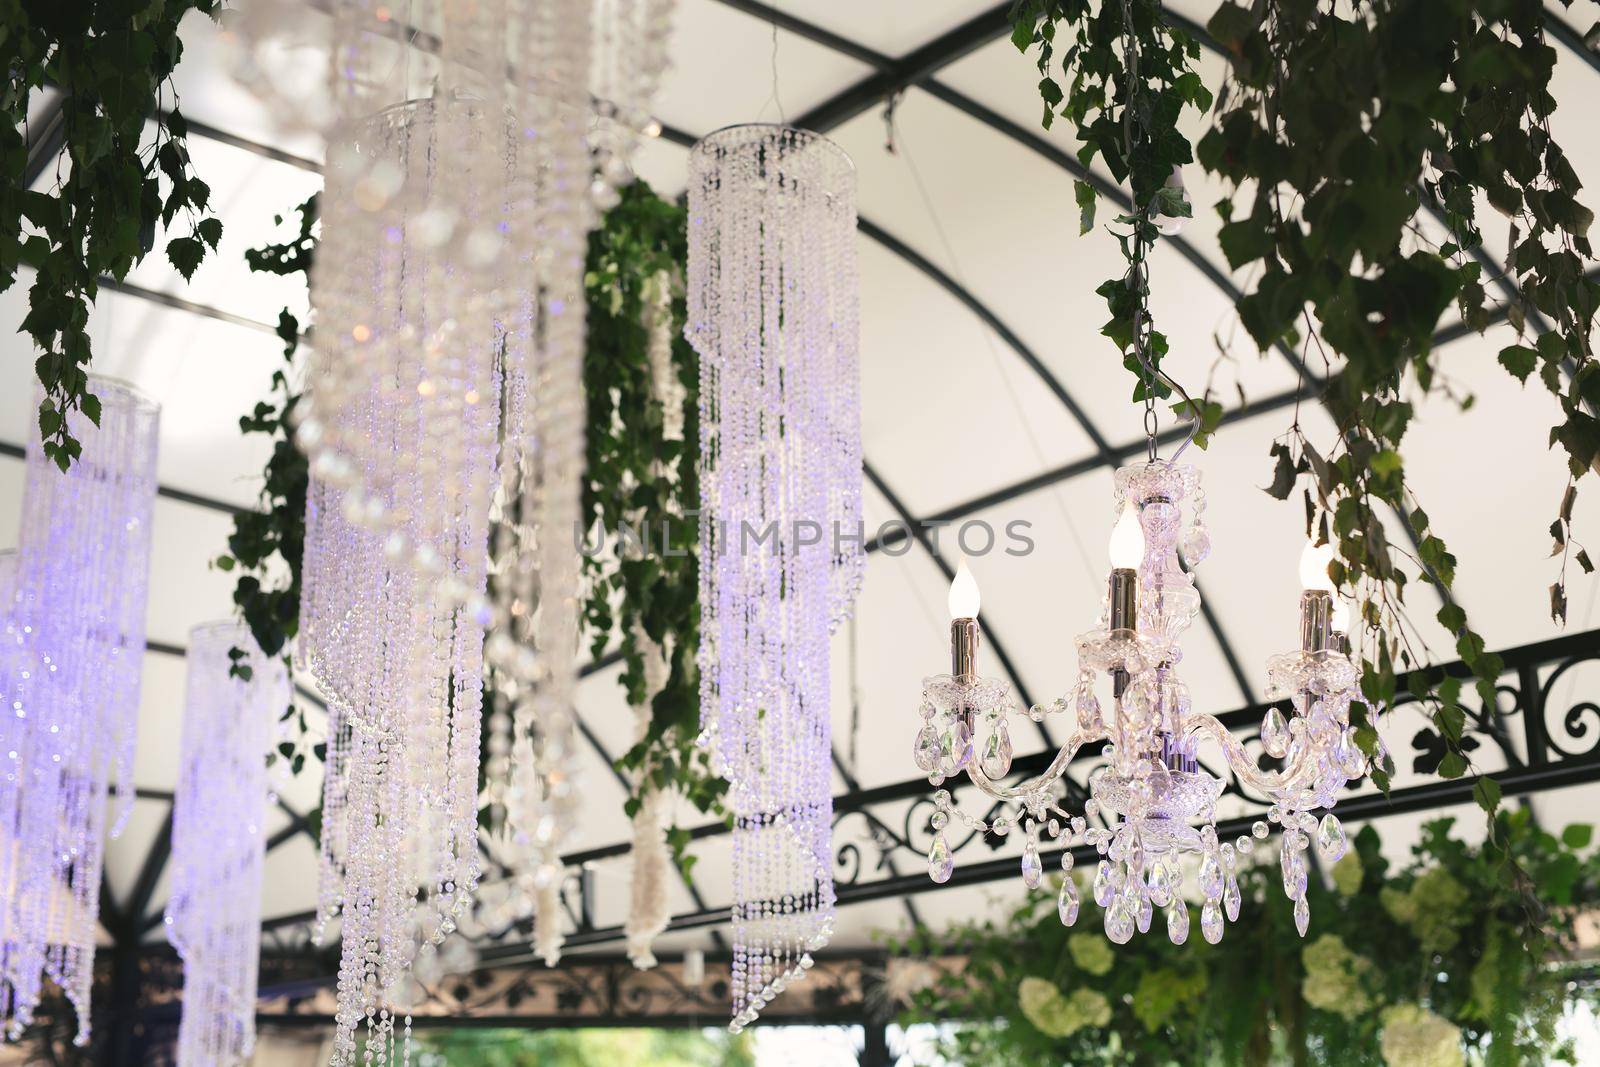 Beautiful luxurious romantic decor for a wedding celebration. The arch is decorated with draped fabric and a crystal chandelier.